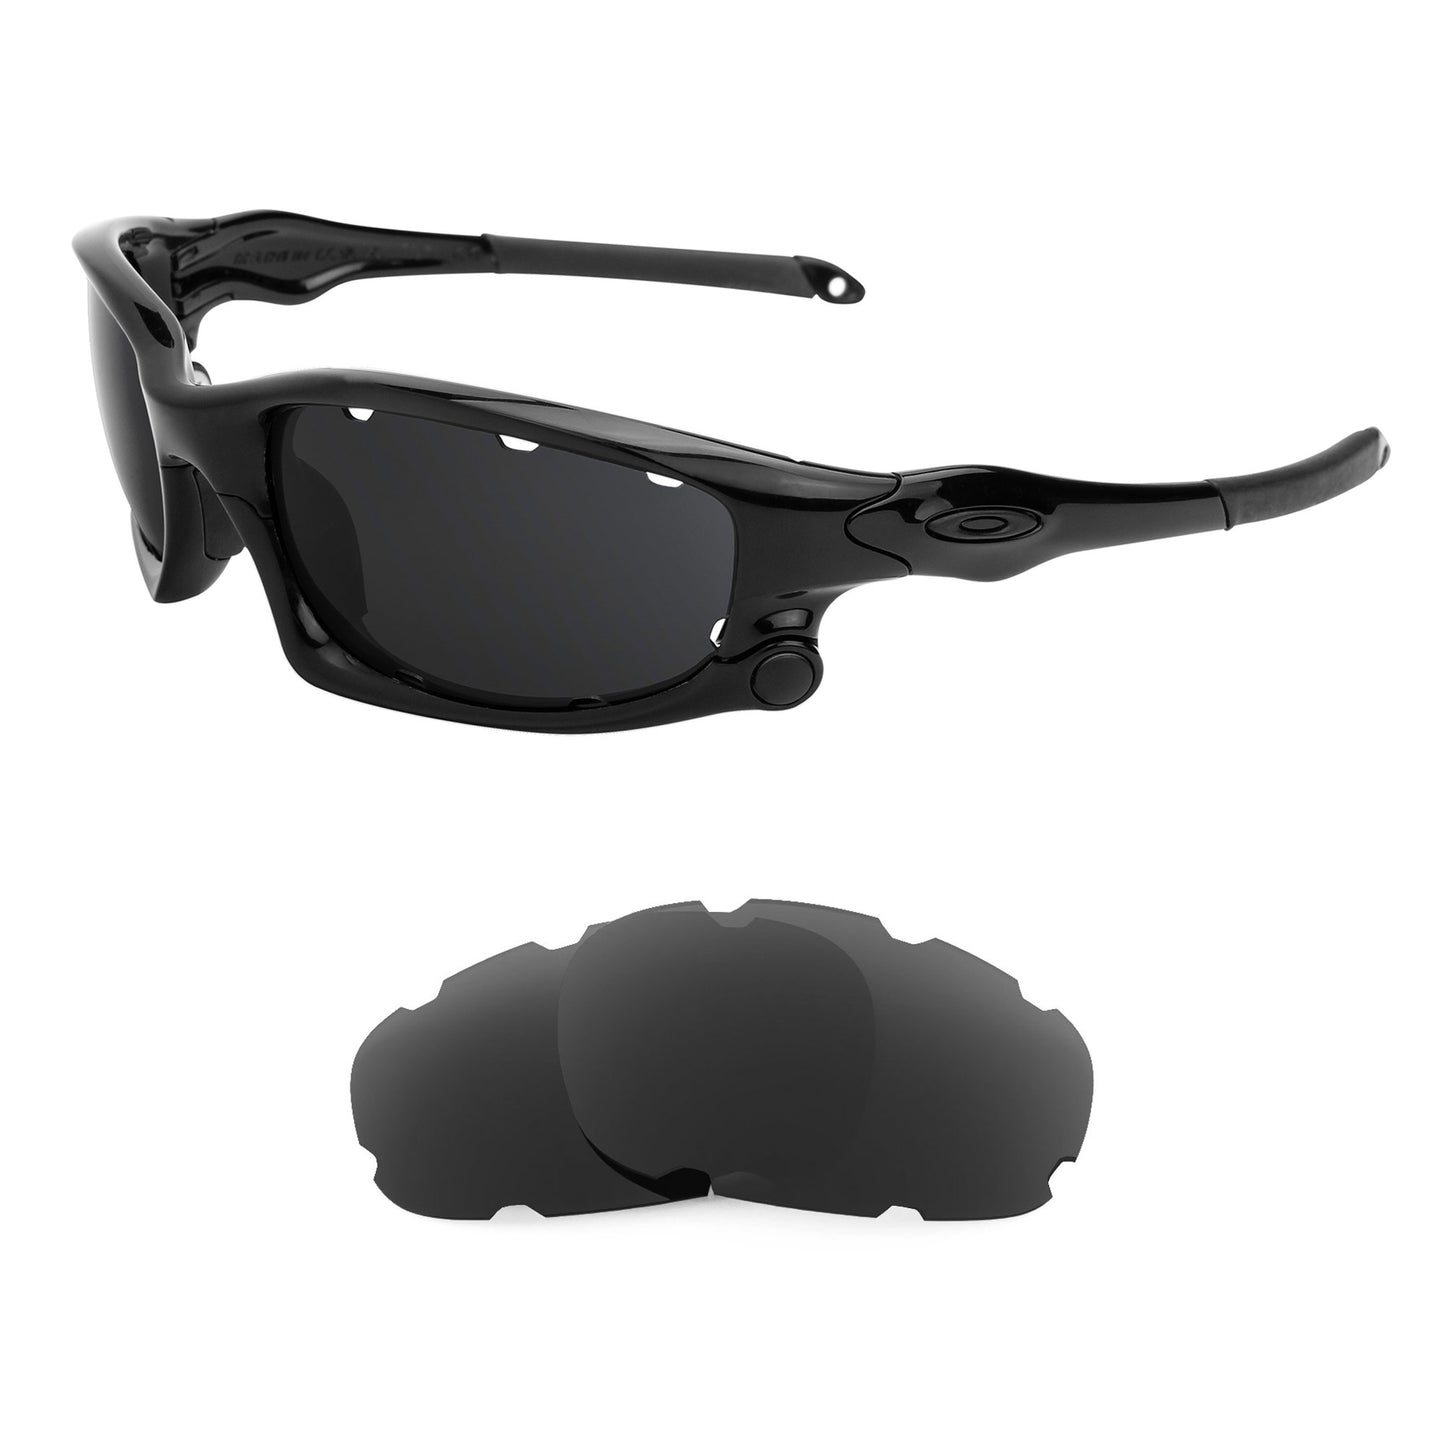 Oakley Split Jacket Vented sunglasses with replacement lenses